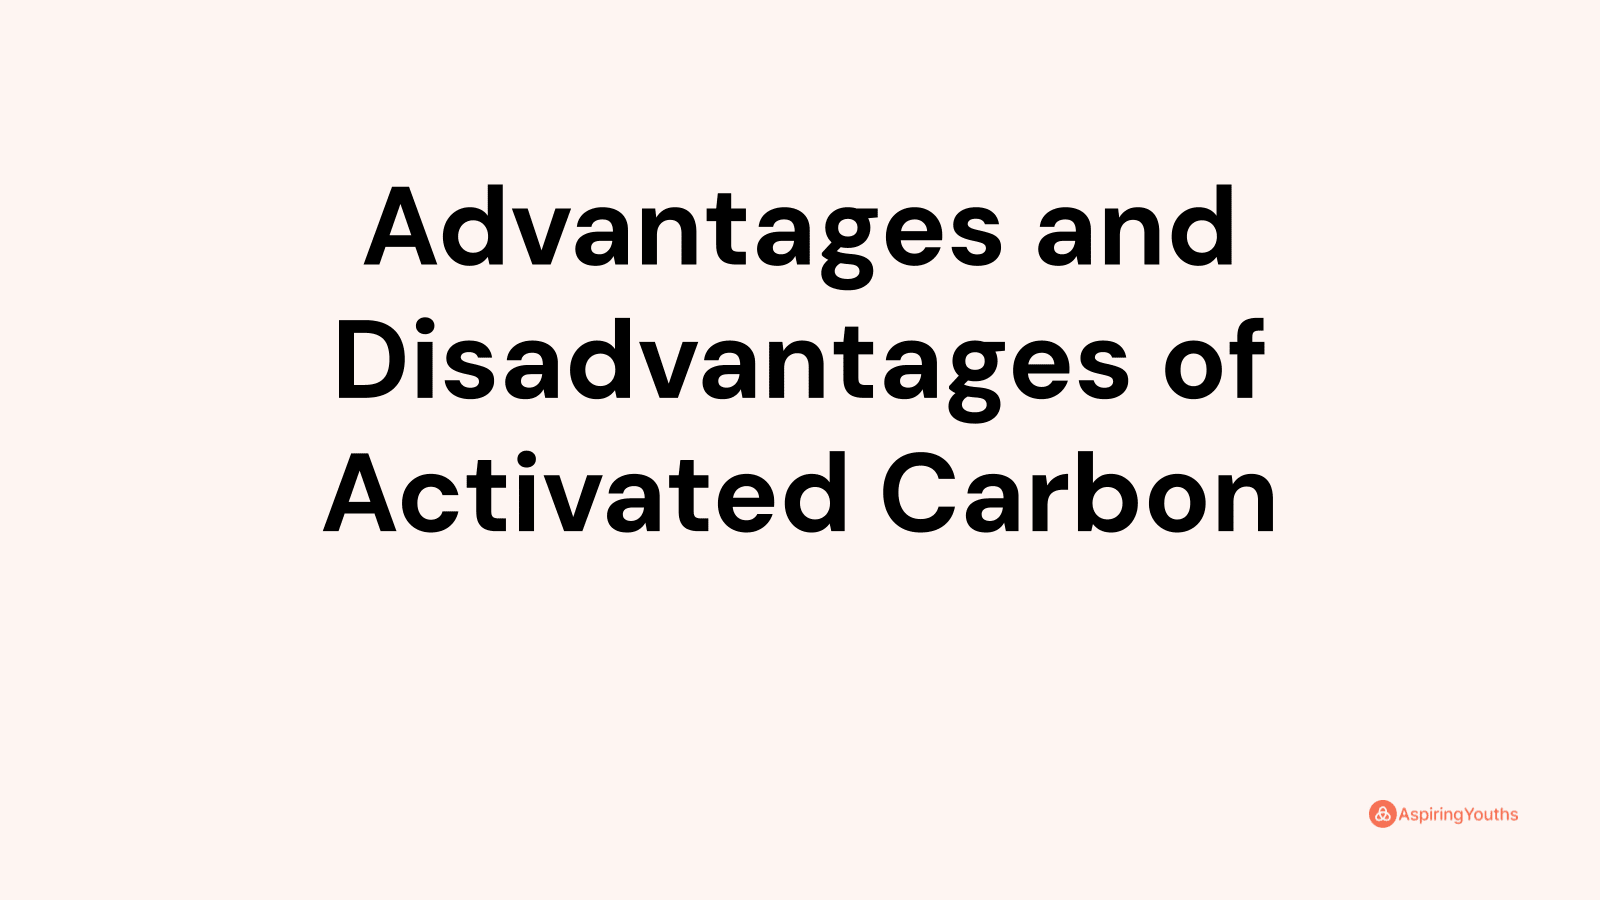 Advantages and disadvantages of Activated Carbon